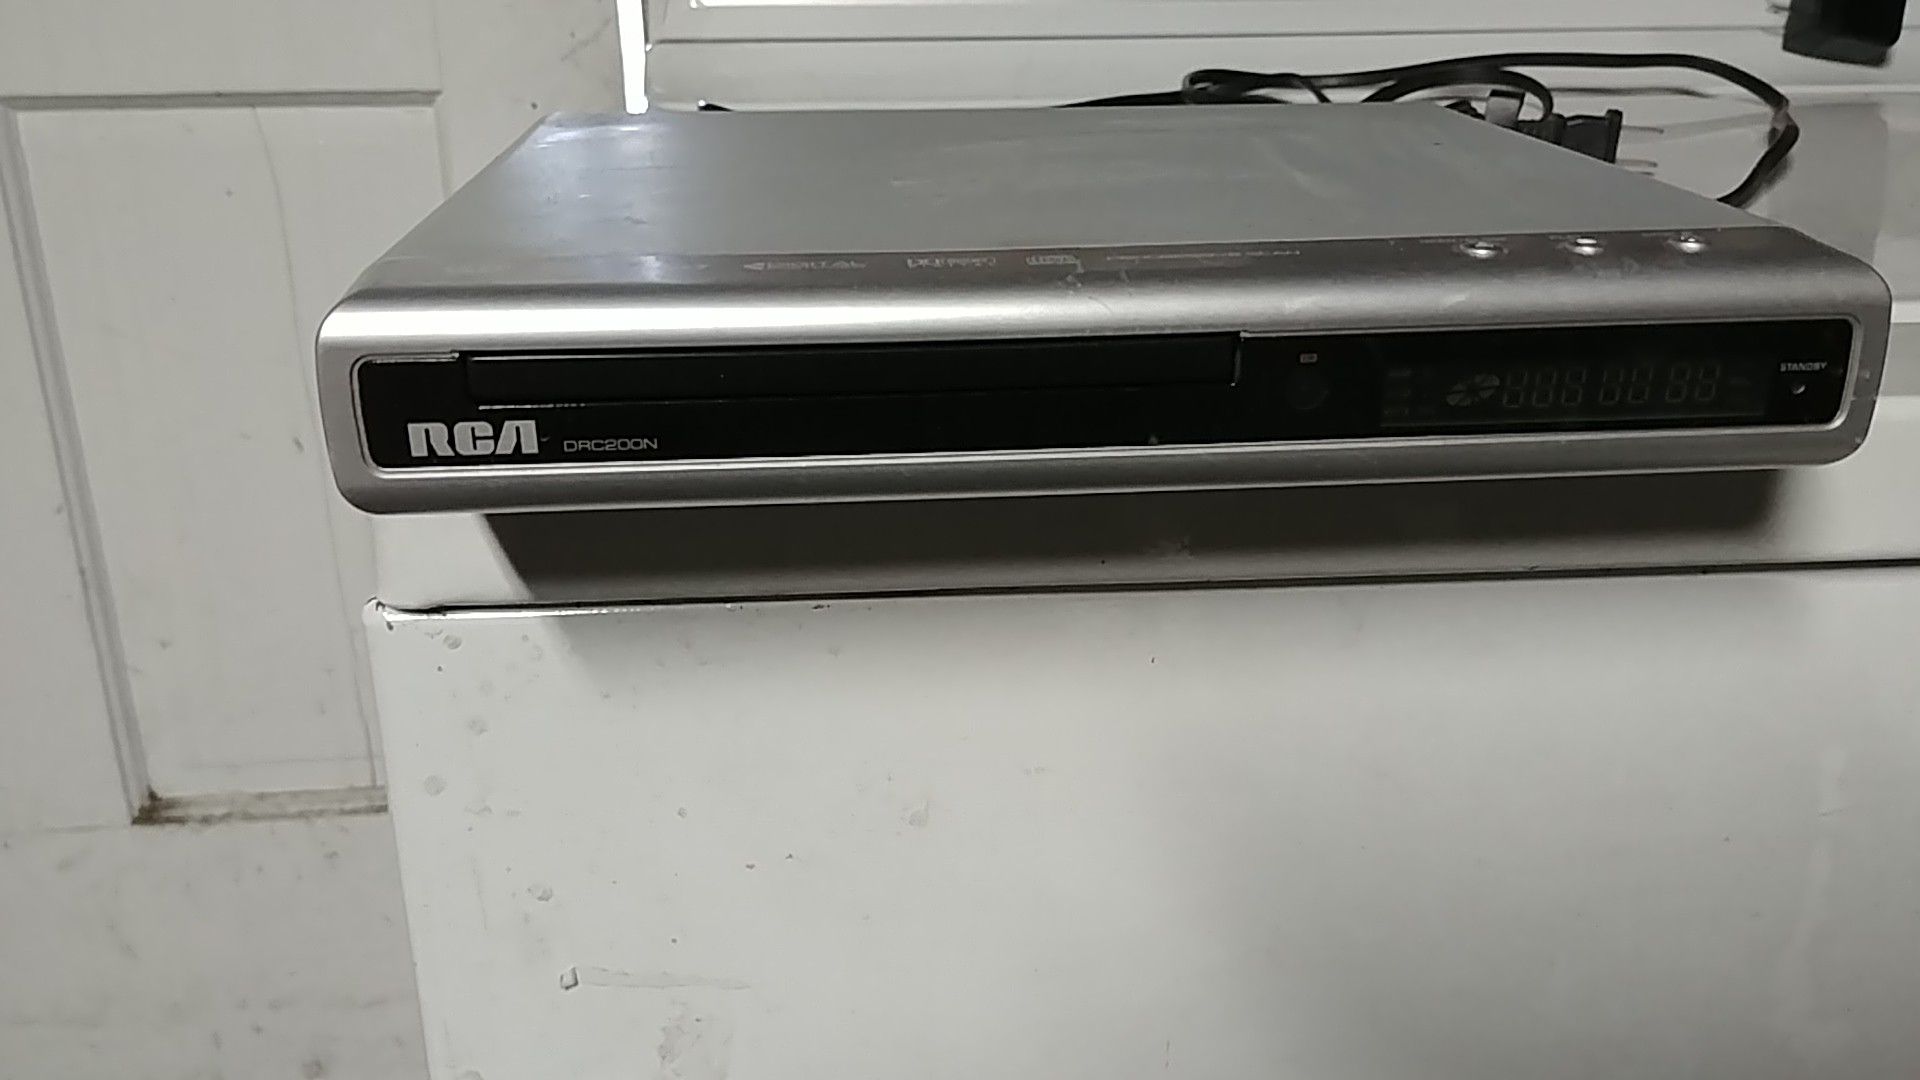 RCA DVD and Cd player